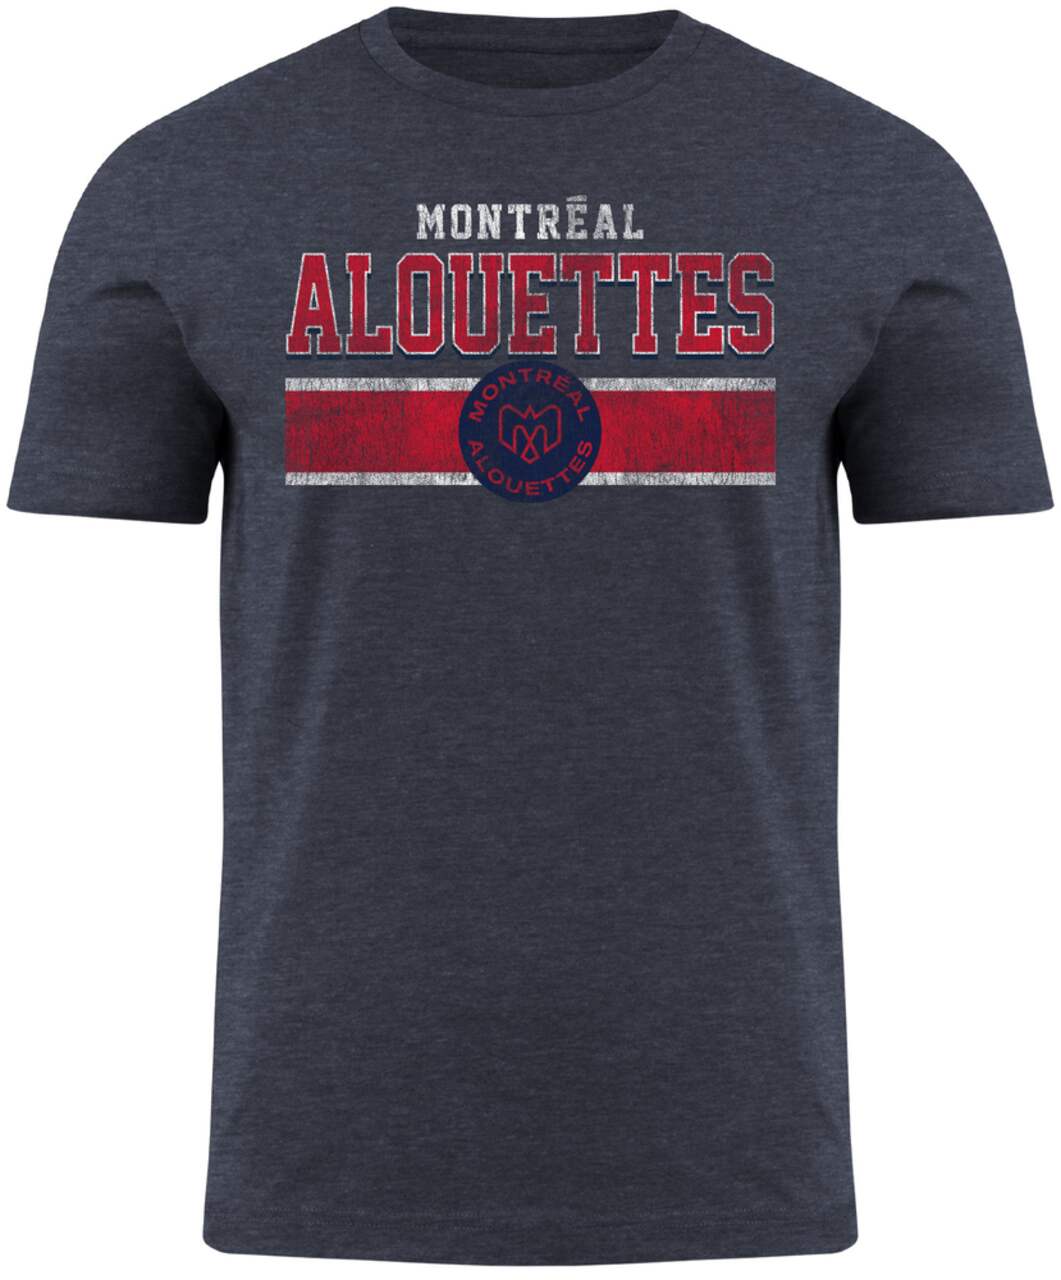 Montreal Alouettes Moxie T-Shirt